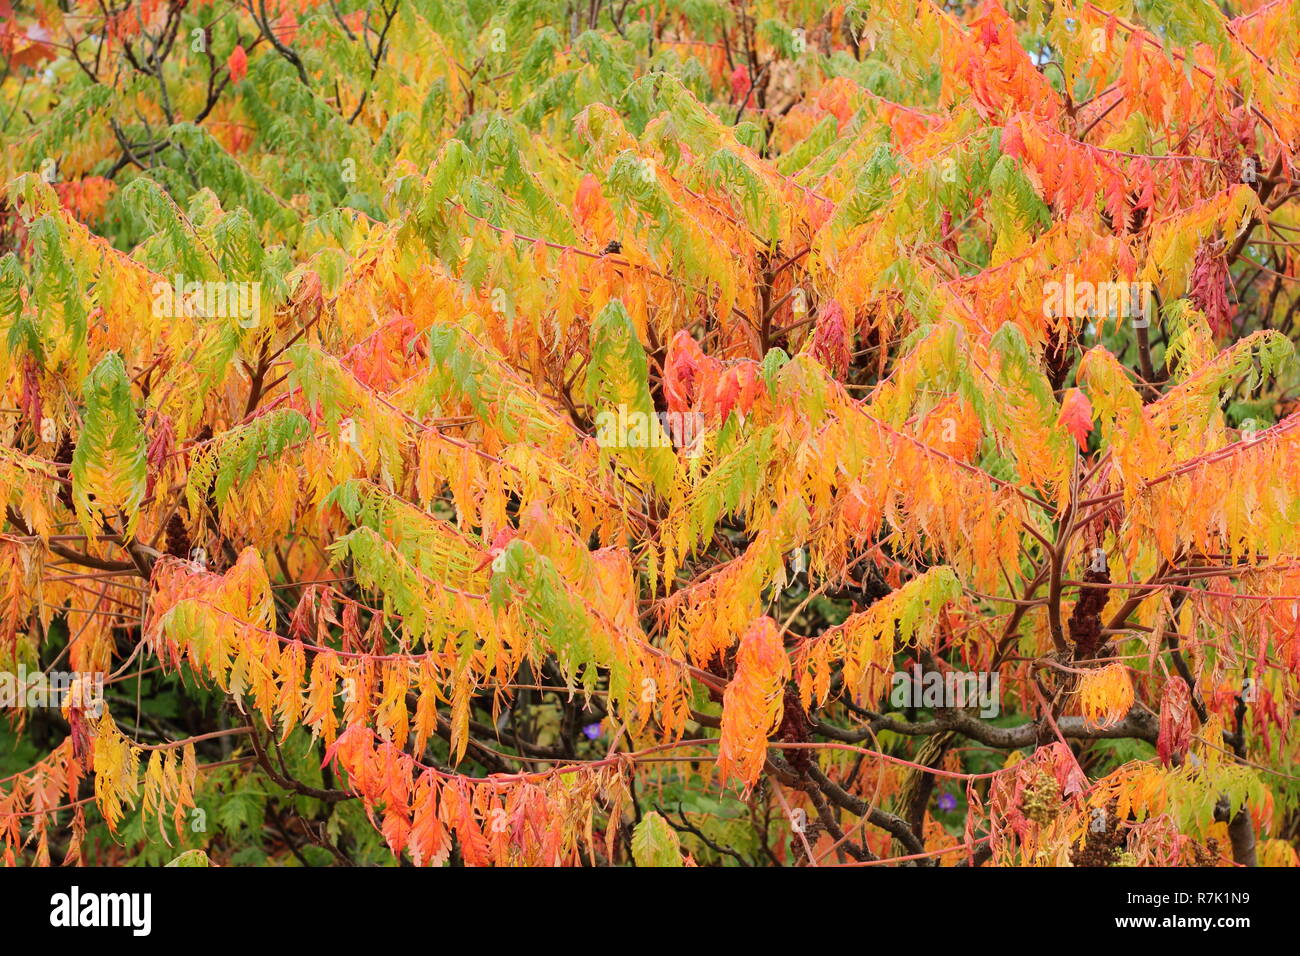 Rhus typhina. Stag's horn sumach, a large, suckering plant, displaying vibrant autumn colours in an English garden, October, UK Stock Photo